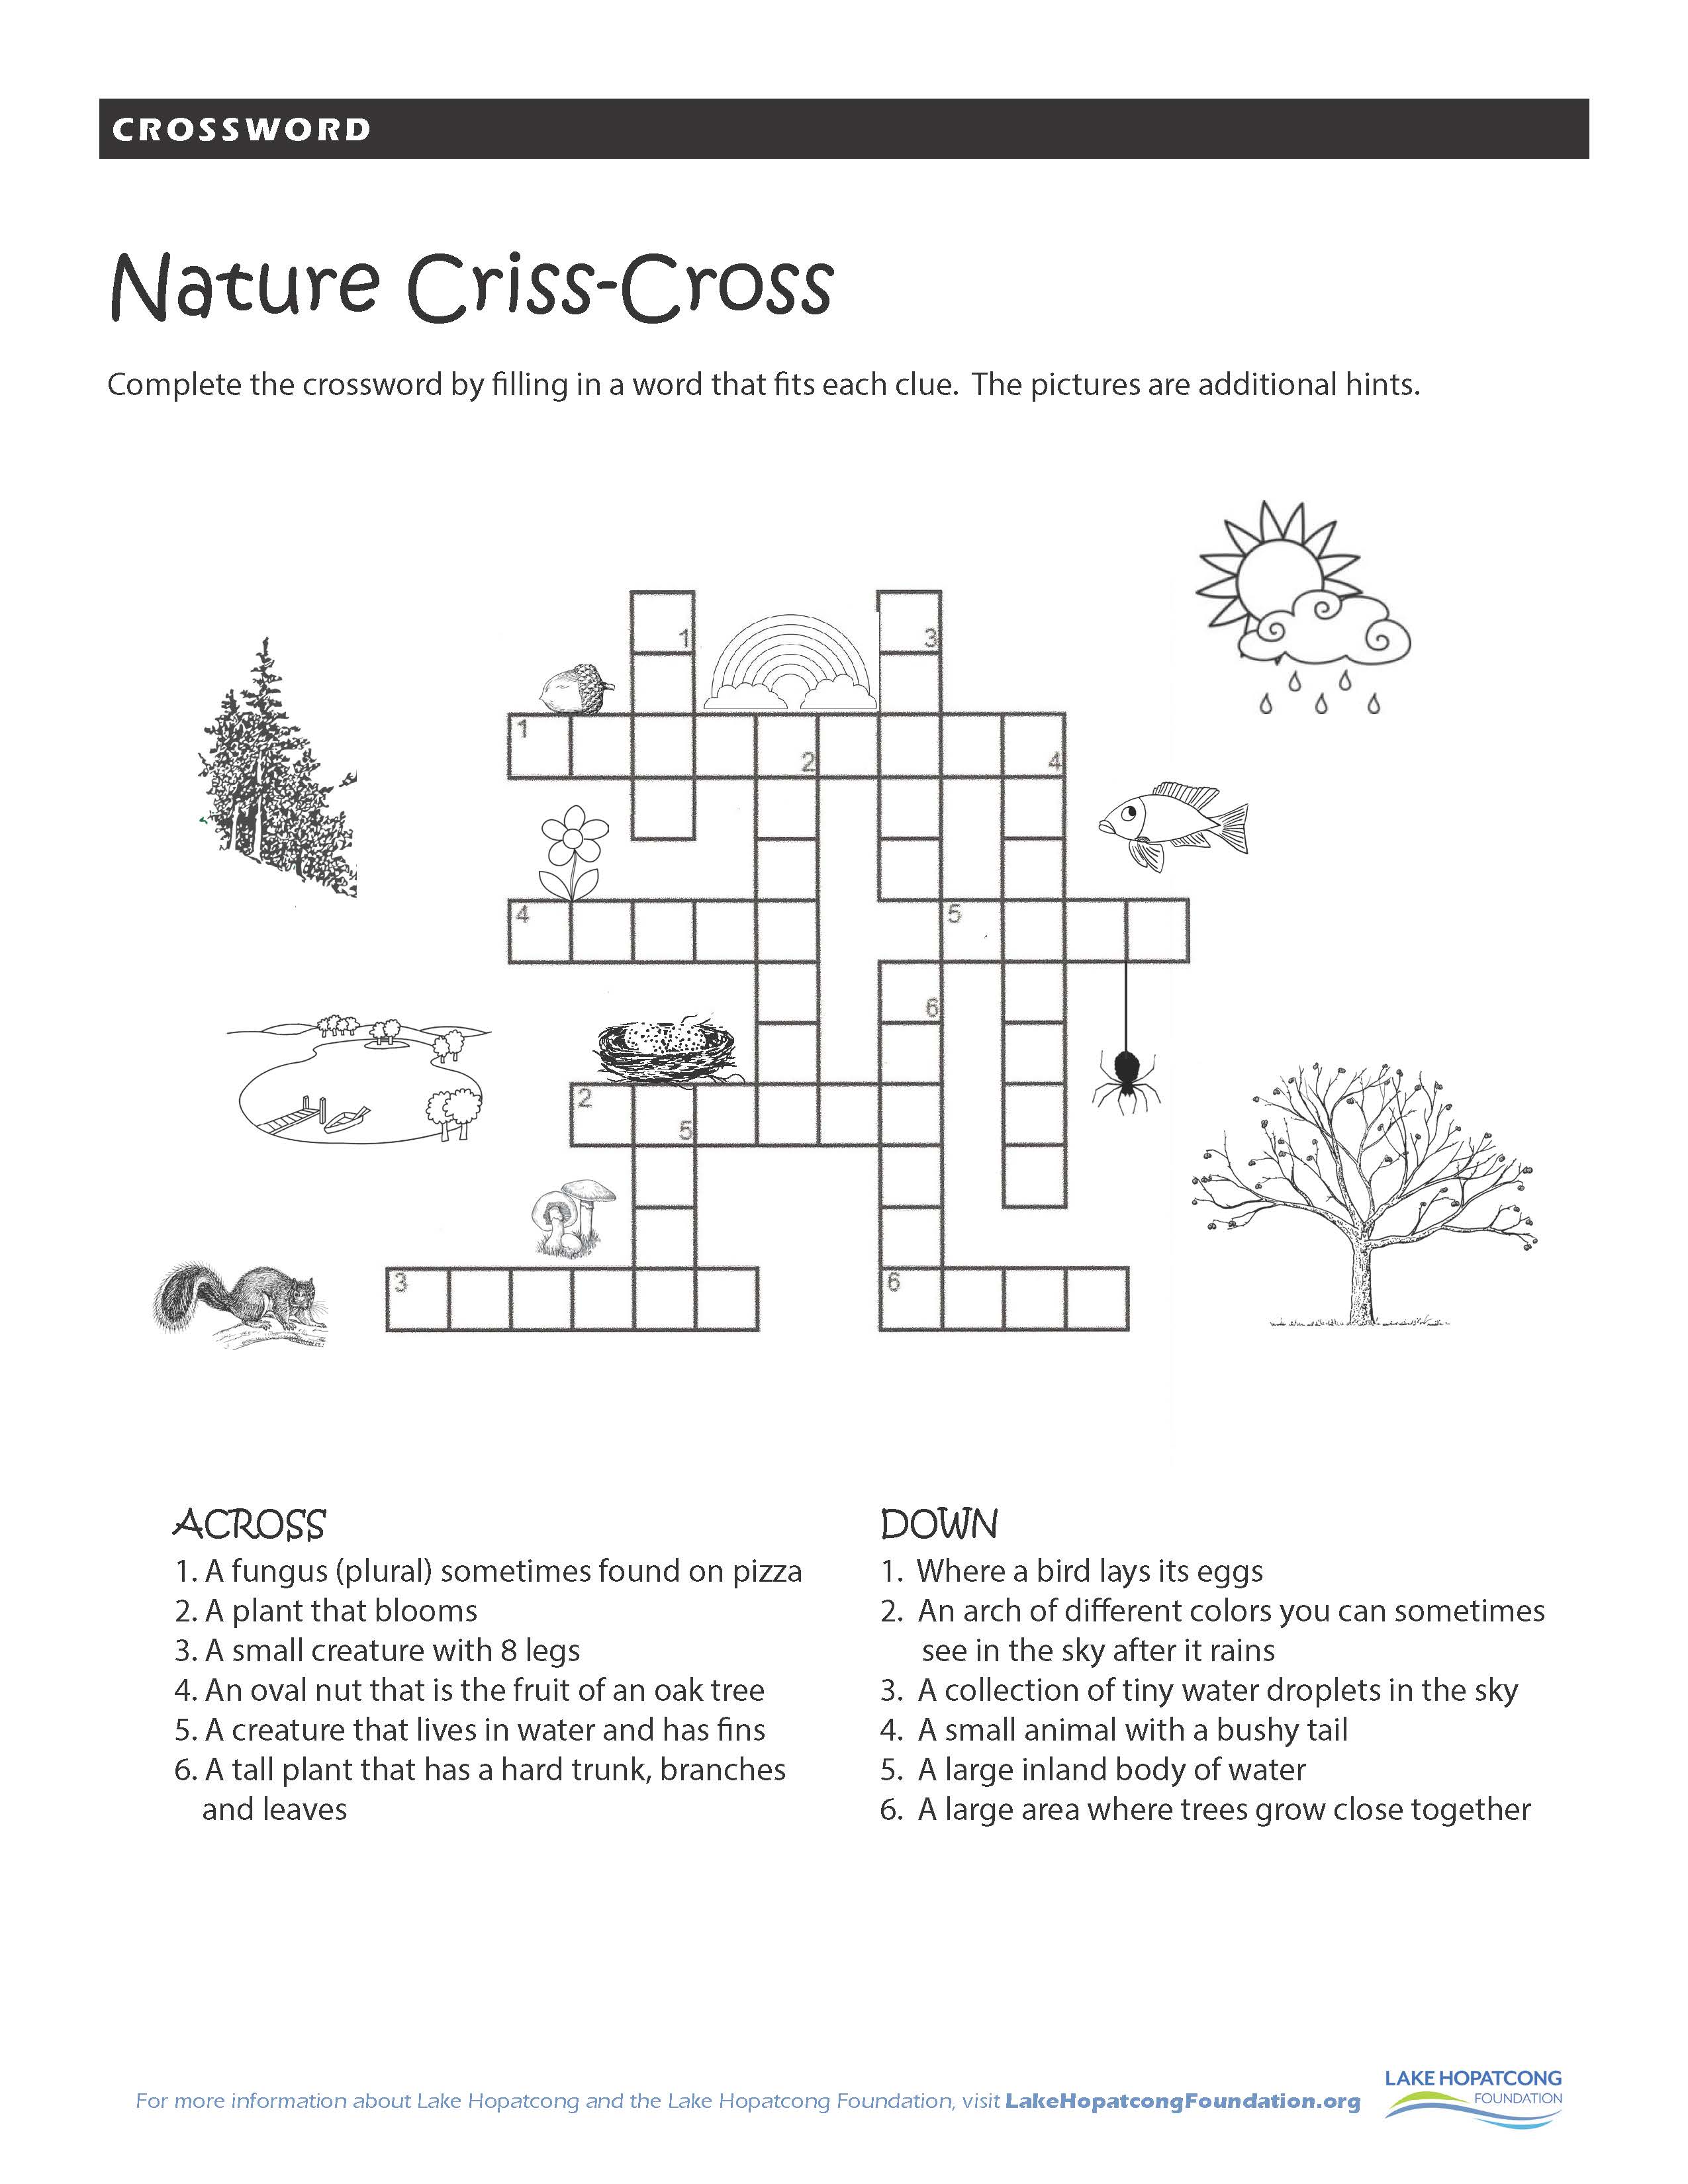 Nature crossword. Small Spruce say crossword clue. Is indecisive crossword clue. Cheerful nature crossword clue.